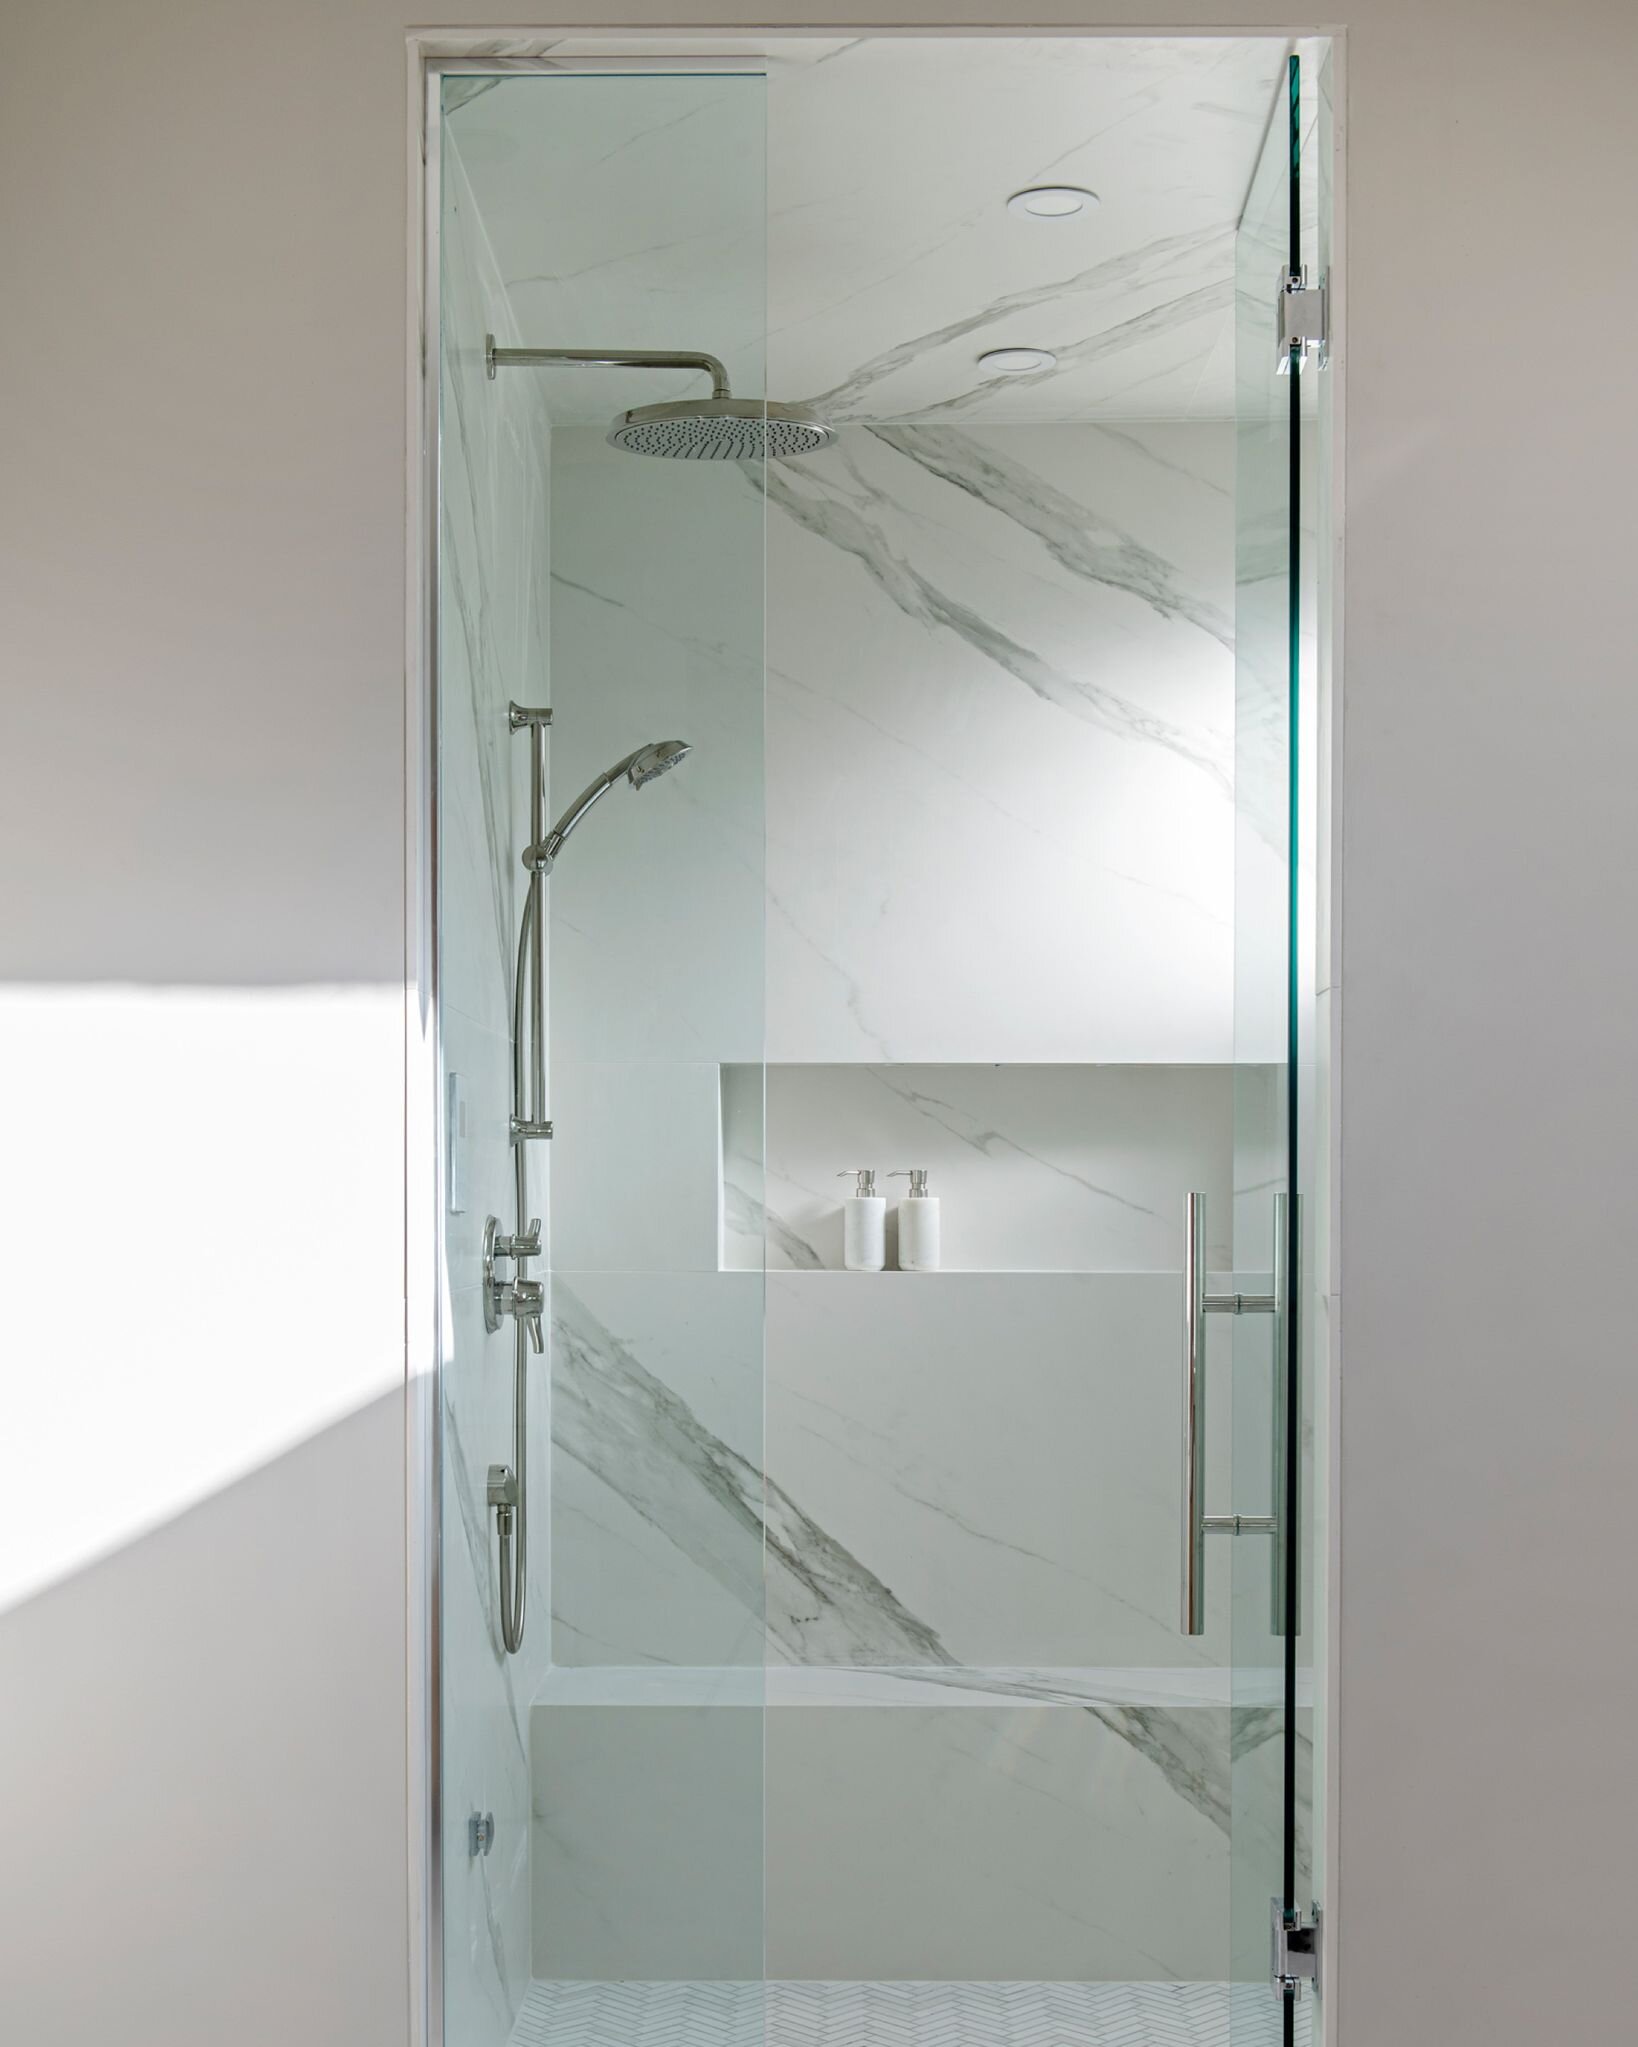 Ⓑ &mdash;CONTEMPORARY COMFORT
Indulge in the ultimate relaxation experience right in the comfort of your own home with a sleek and stylish steam shower. With its contemporary design featuring clean lines and timeless hardware, this luxurious addition